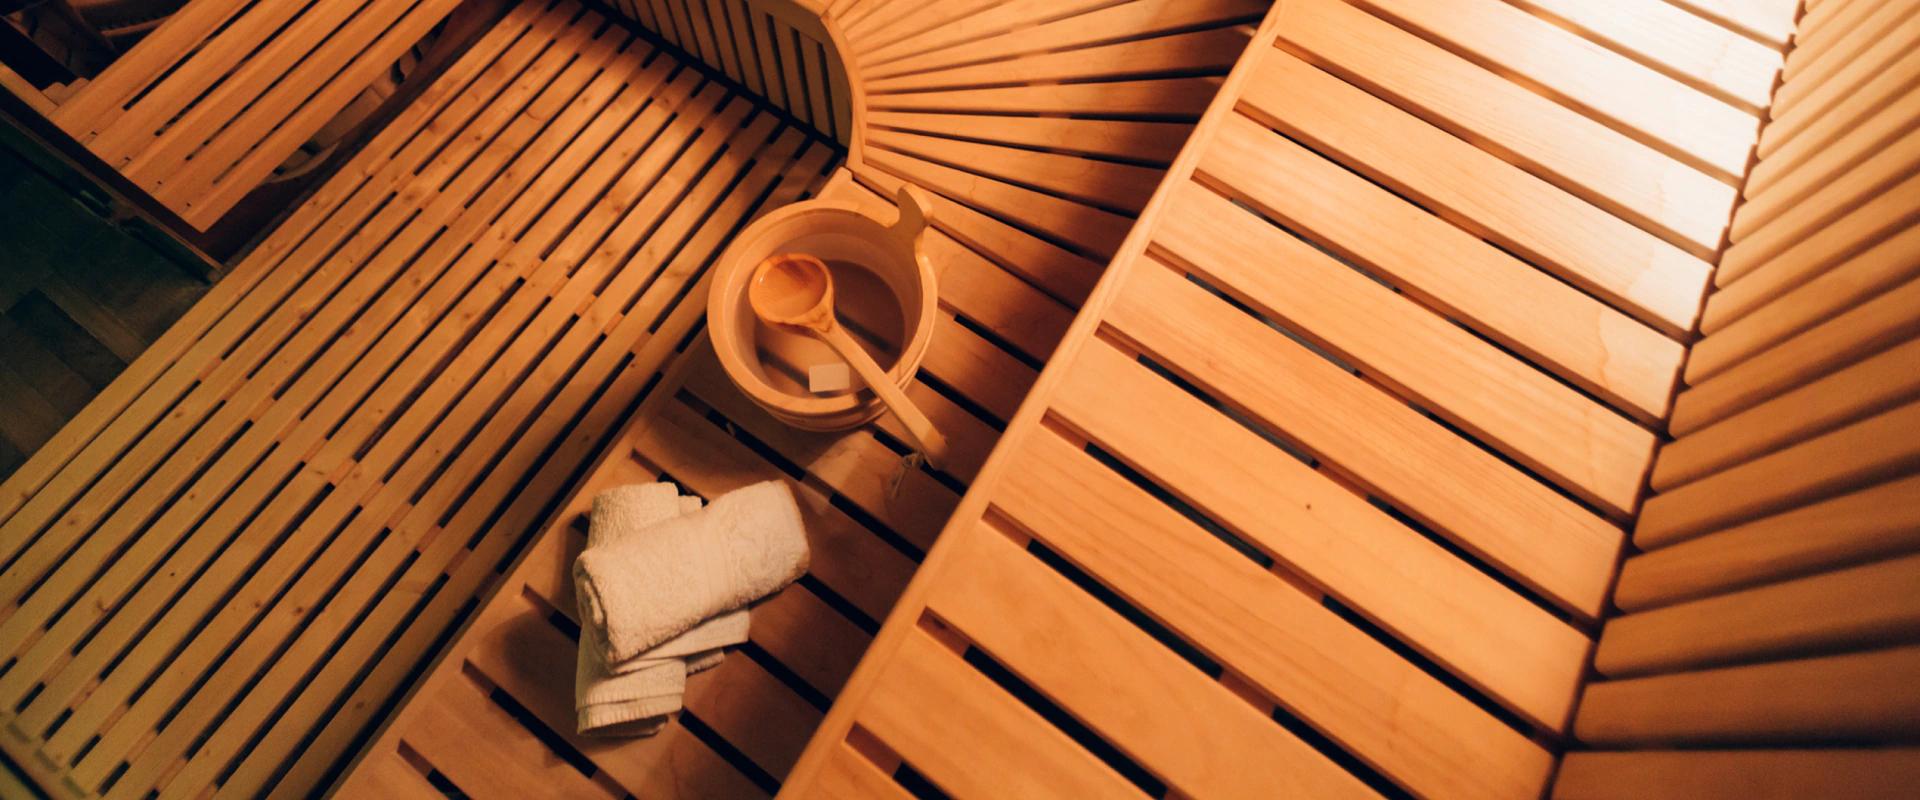 top shot of clean sauna with bucket and towels